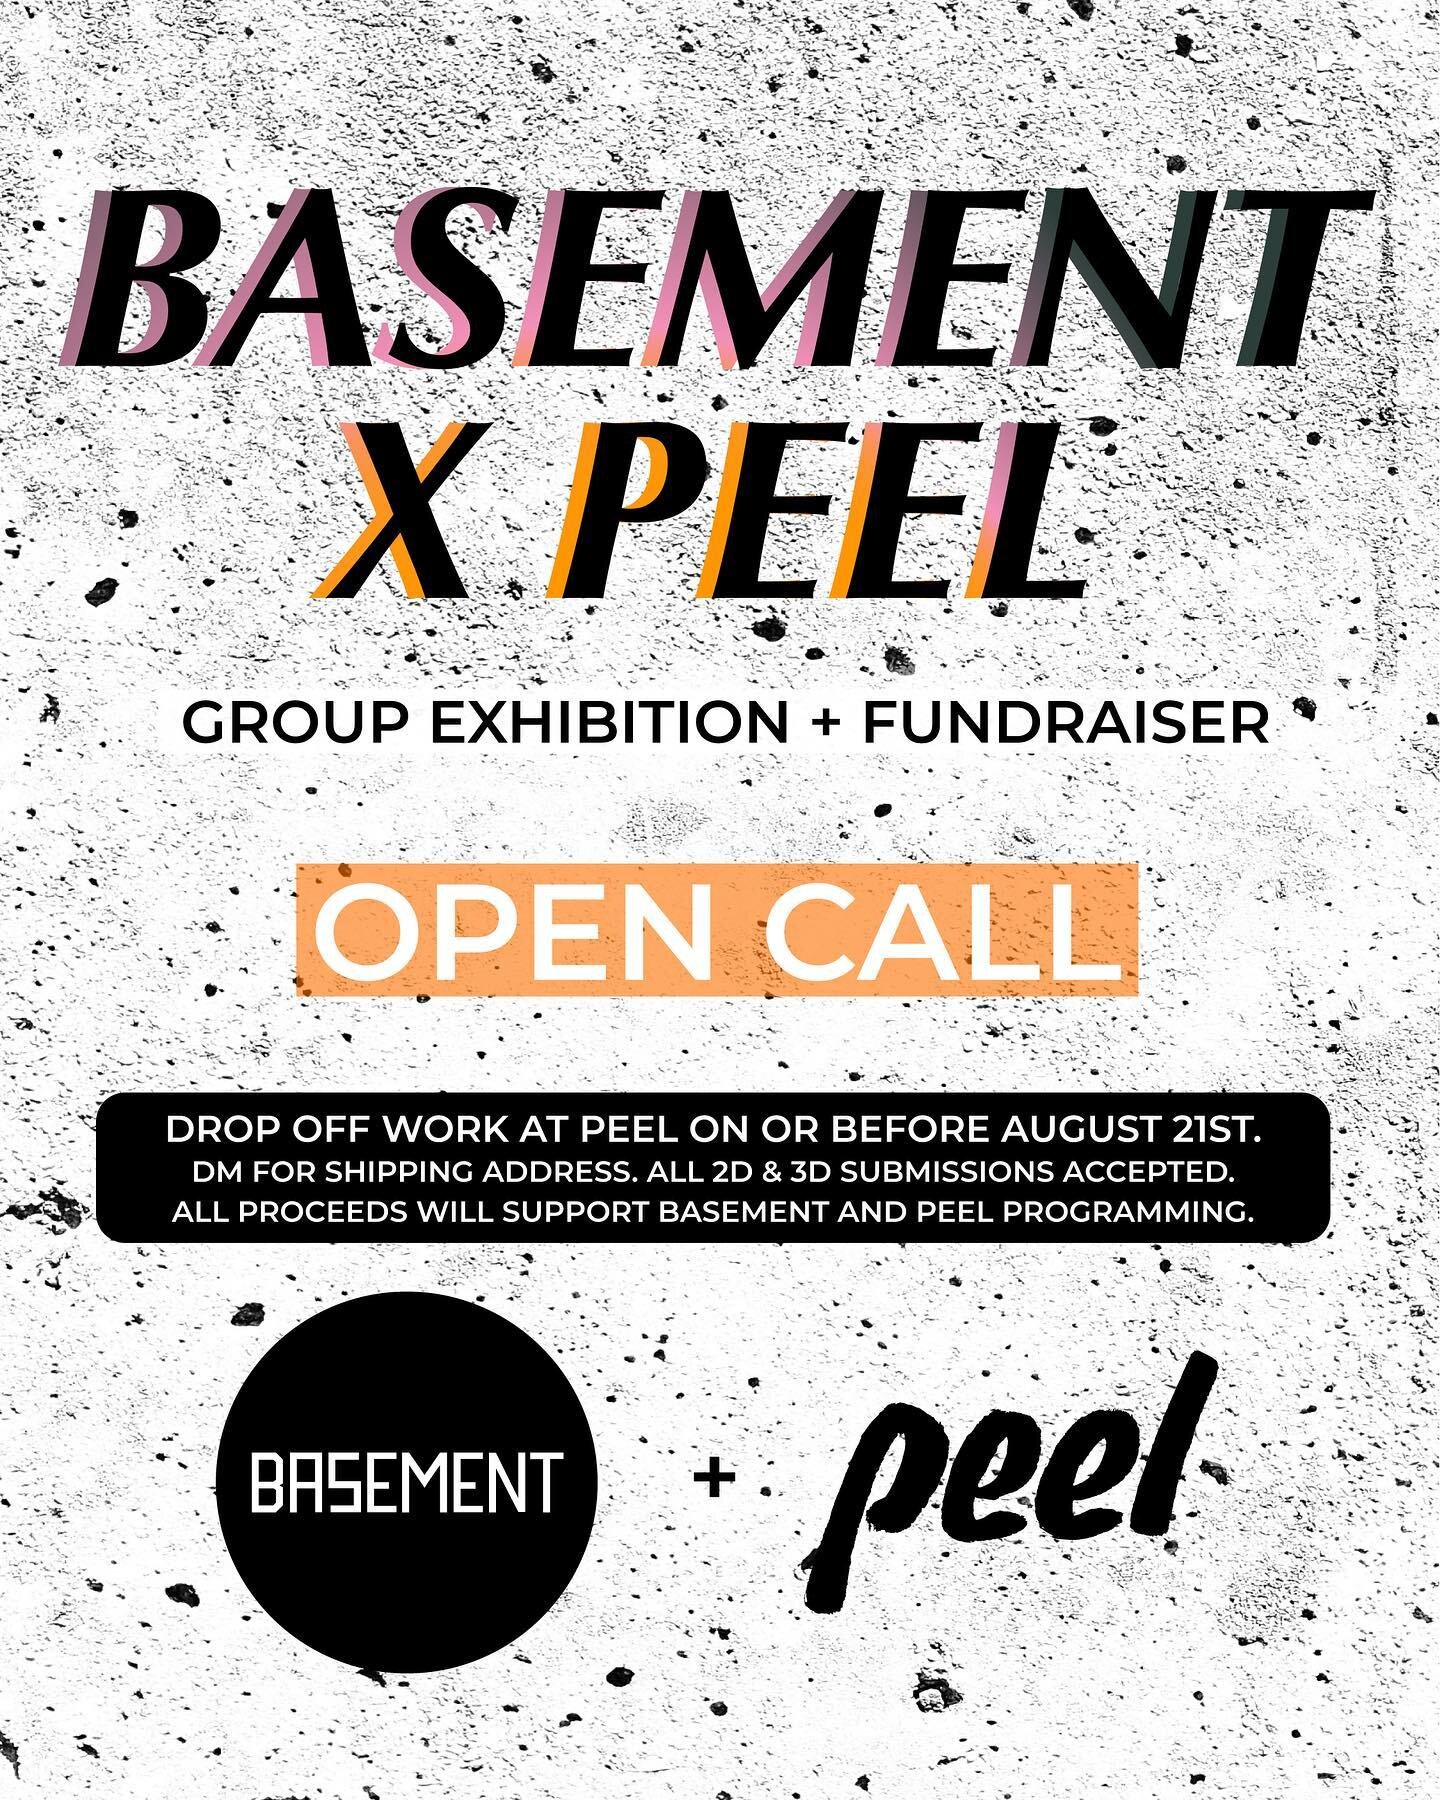 OPEN CALL FOR BASEMENT &amp; PEEL!

We&rsquo;re excited to be collaborating with our friends at Peel for our first open call group exhibition, BASEMENT X PEEL. By participating, you&rsquo;ll help us raise funds to support programming, pay artists, an